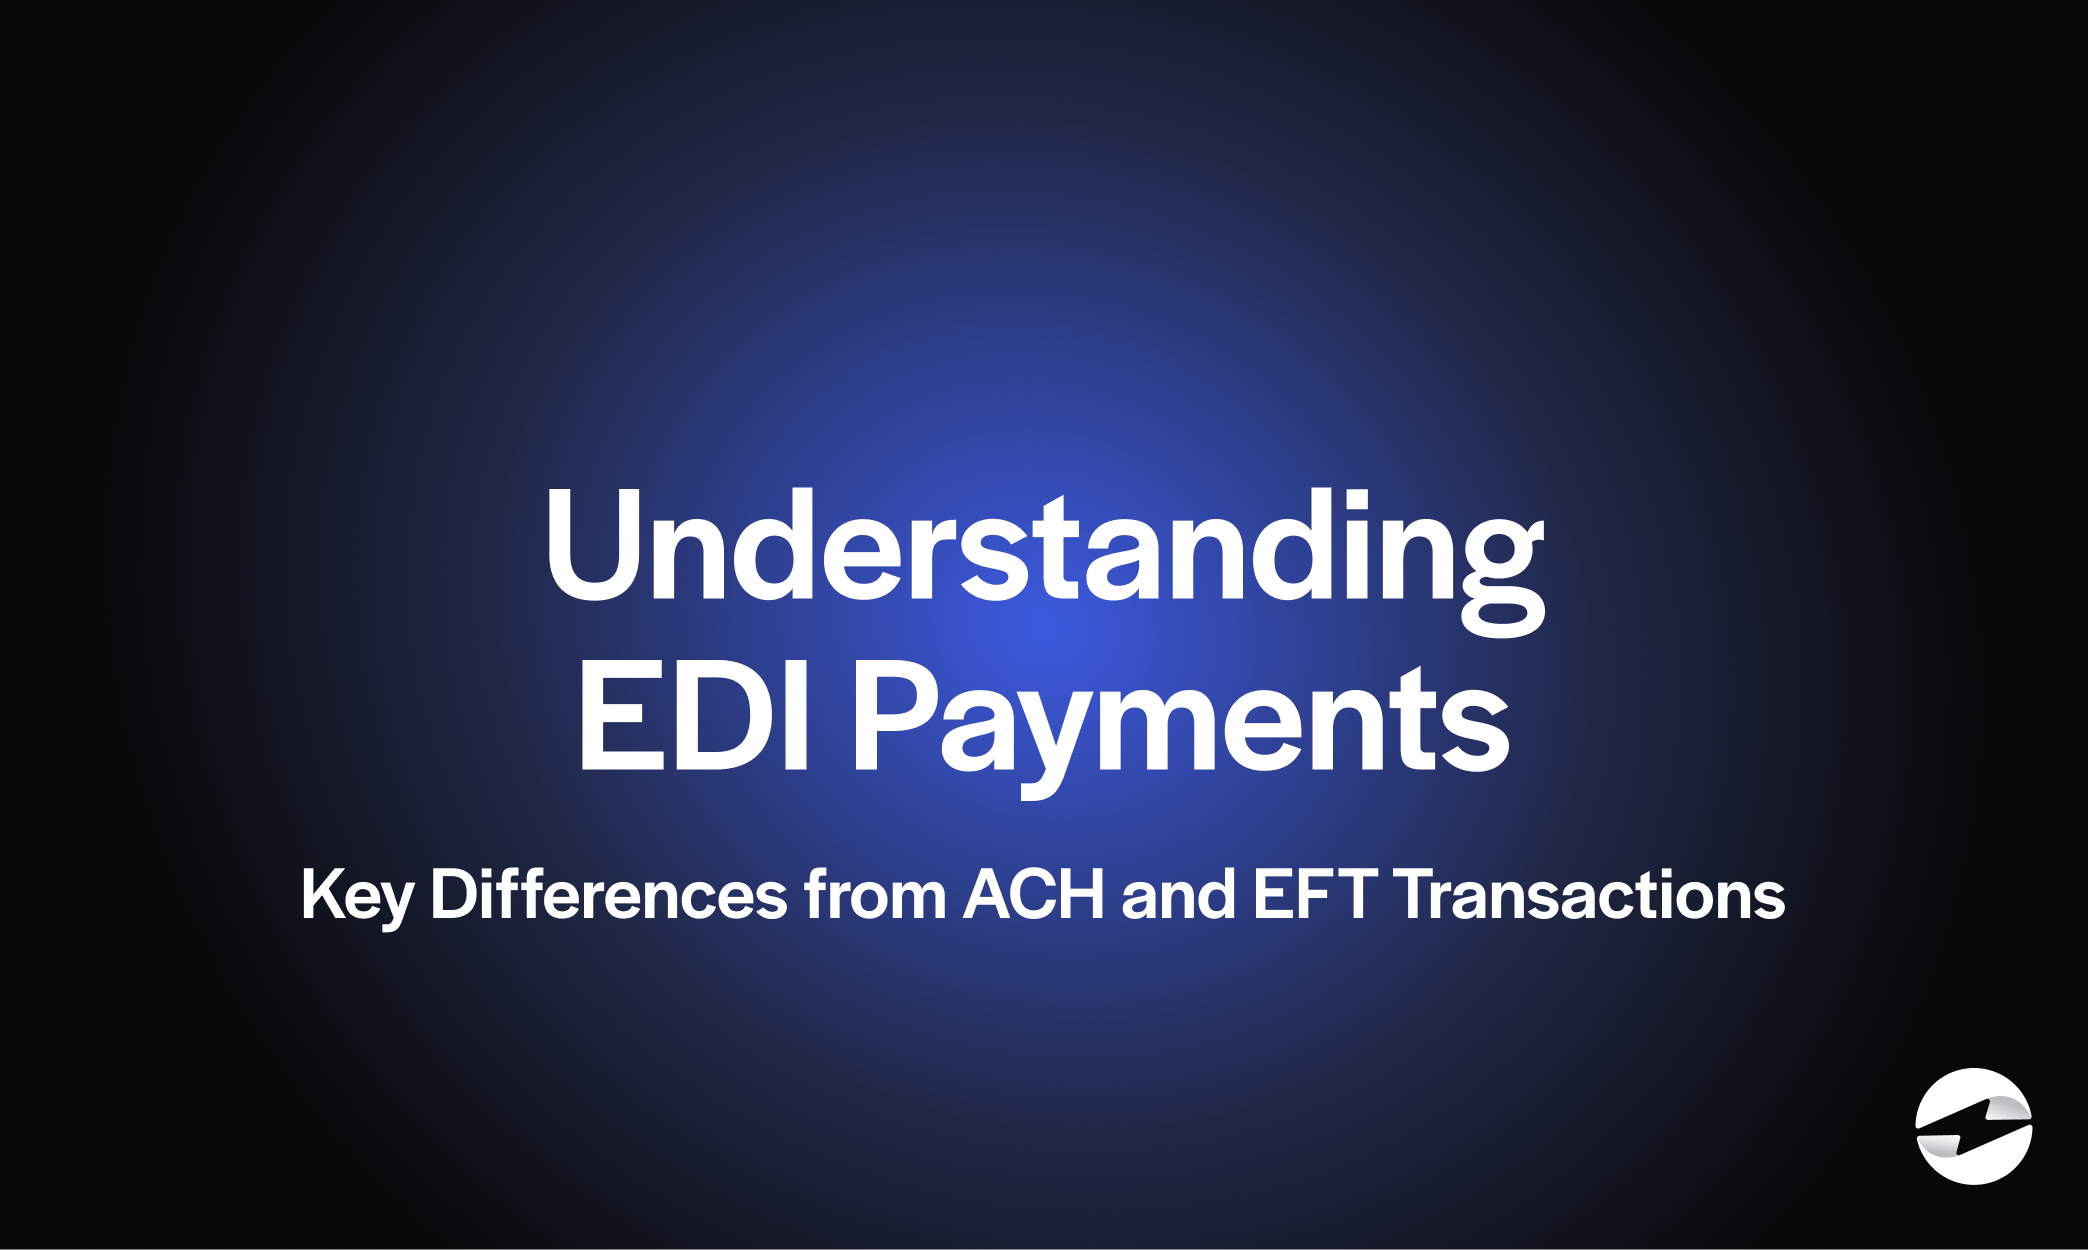 Understanding EDI Payments: Key Differences from ACH and EFT Transactions